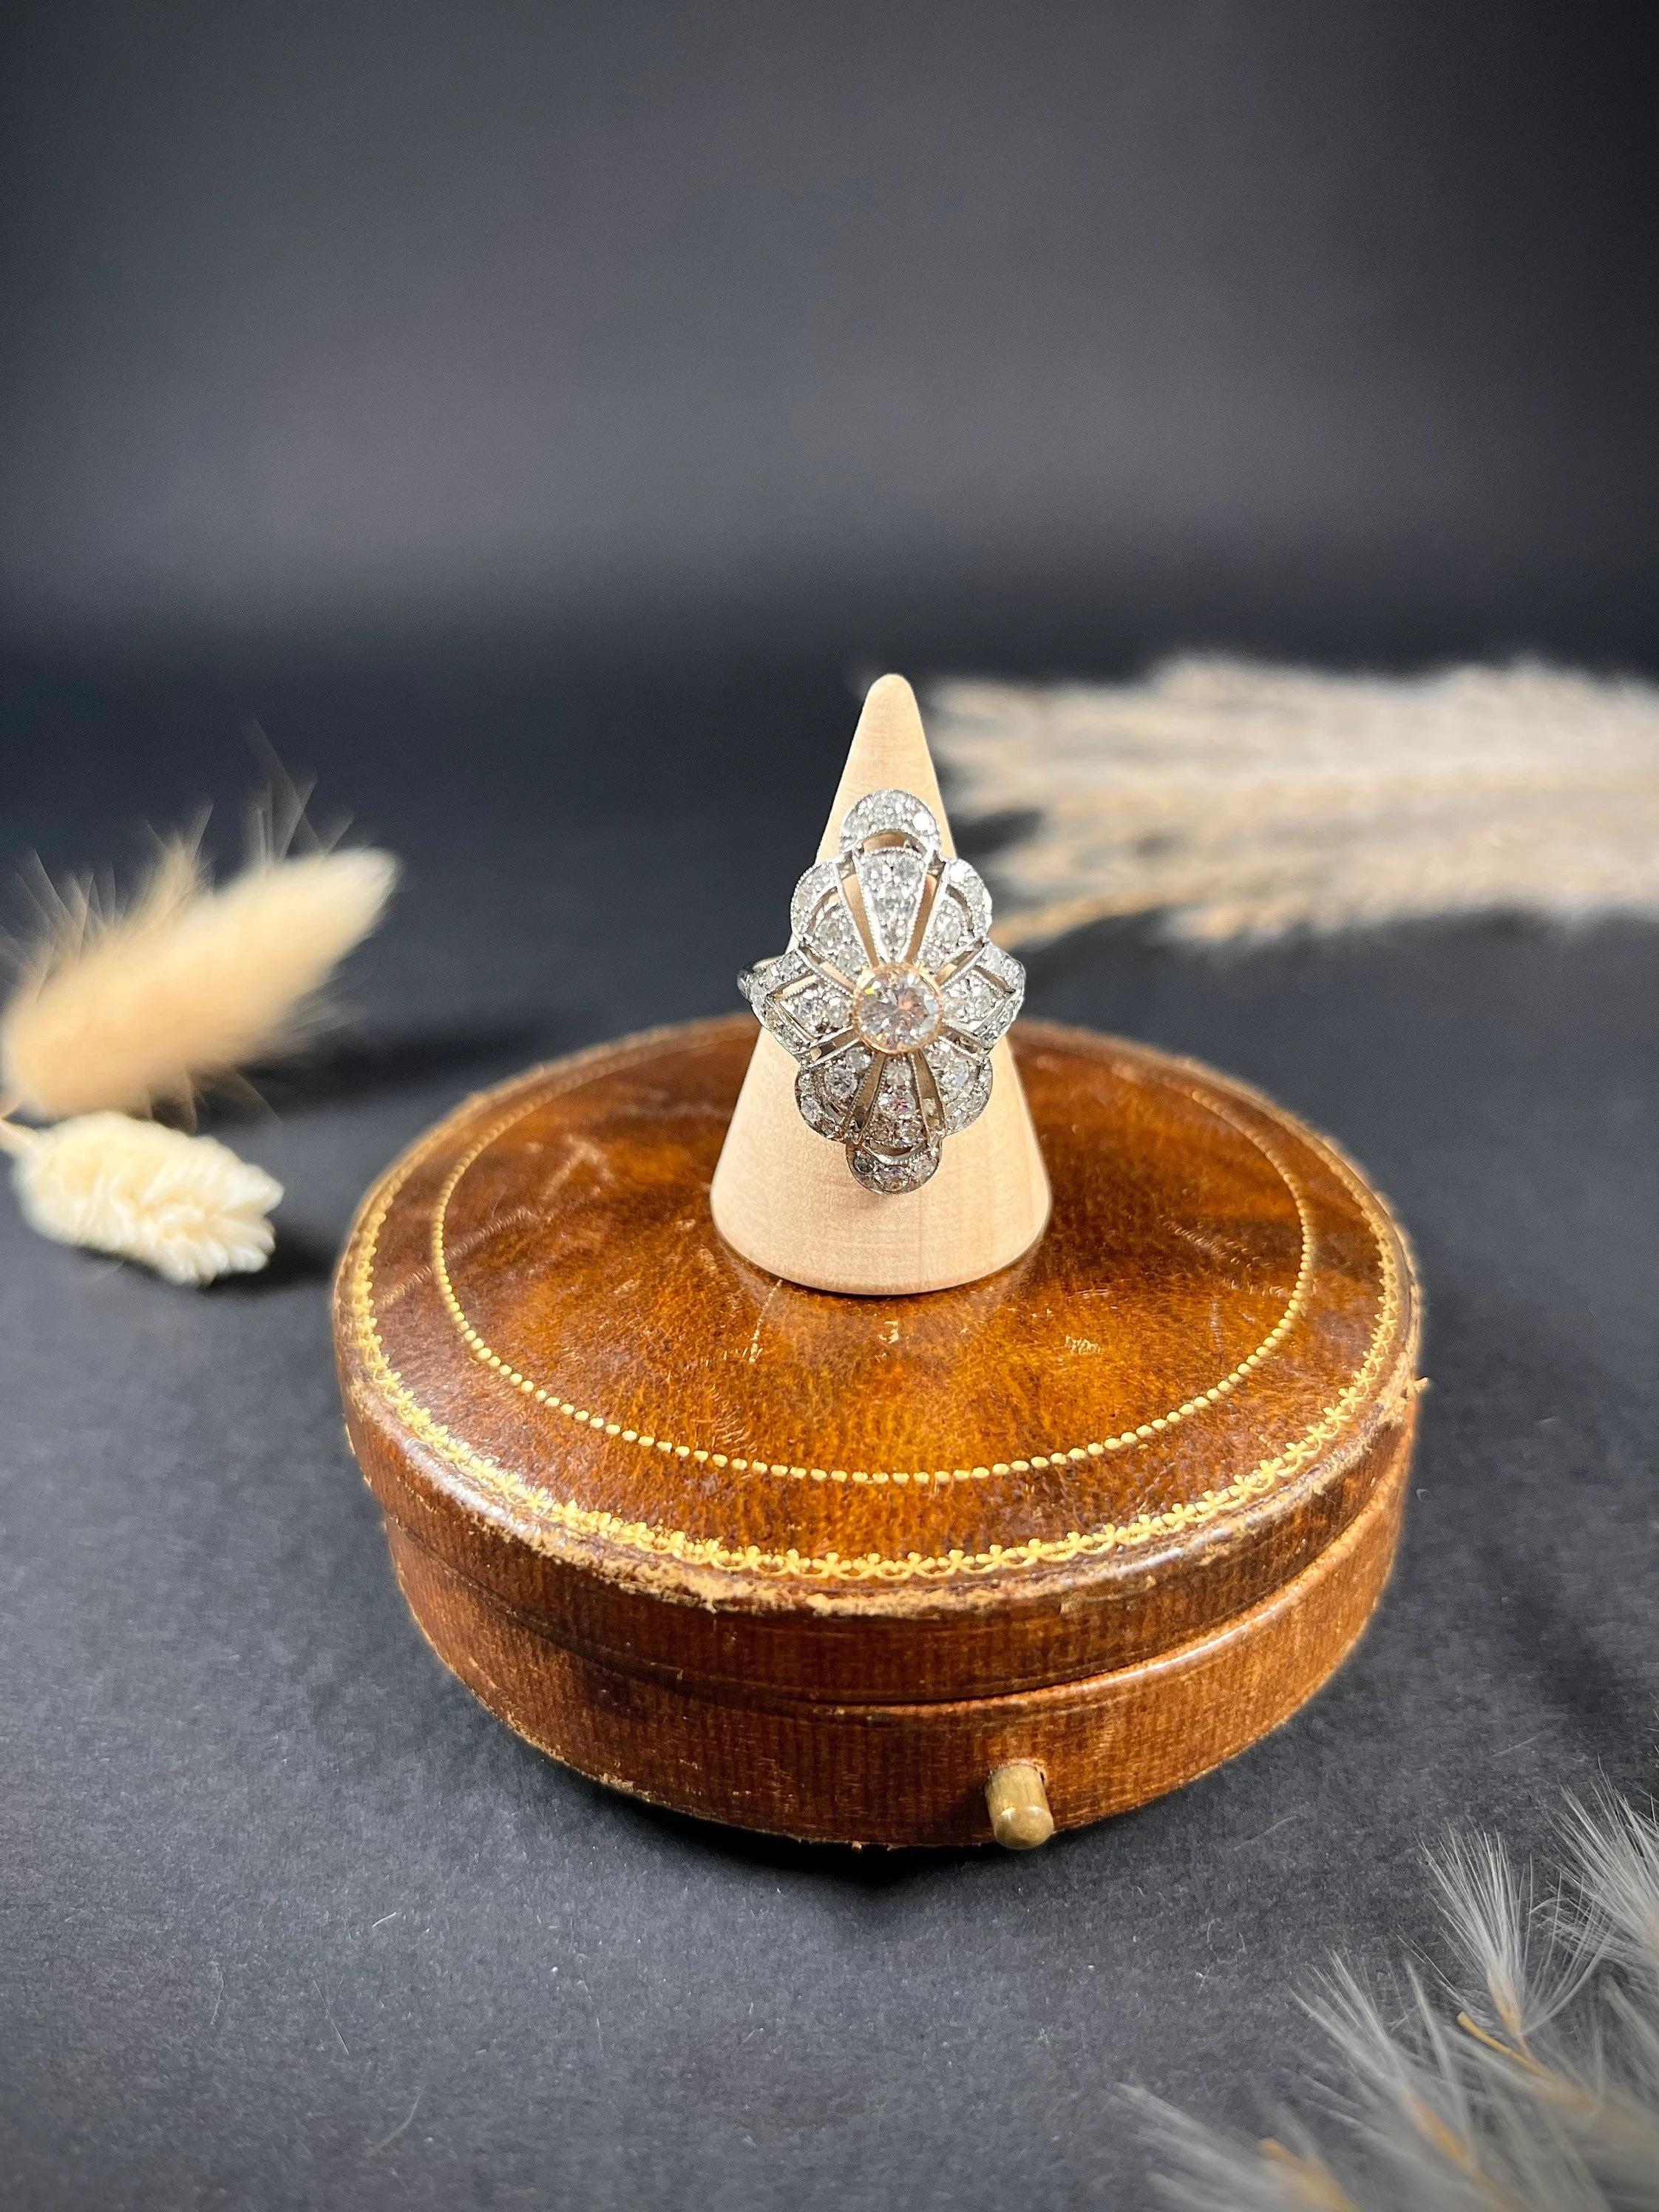 Antique Art Deco Ring

18ct Gold & Platinum Tested

Circa 1920’s

Fabulous, Art Deco bombe/dome design ring. Set with stunning, old cut diamonds through each of the eight fans. The centre stone is approximately 5mm in diameter with a gorgeous rose